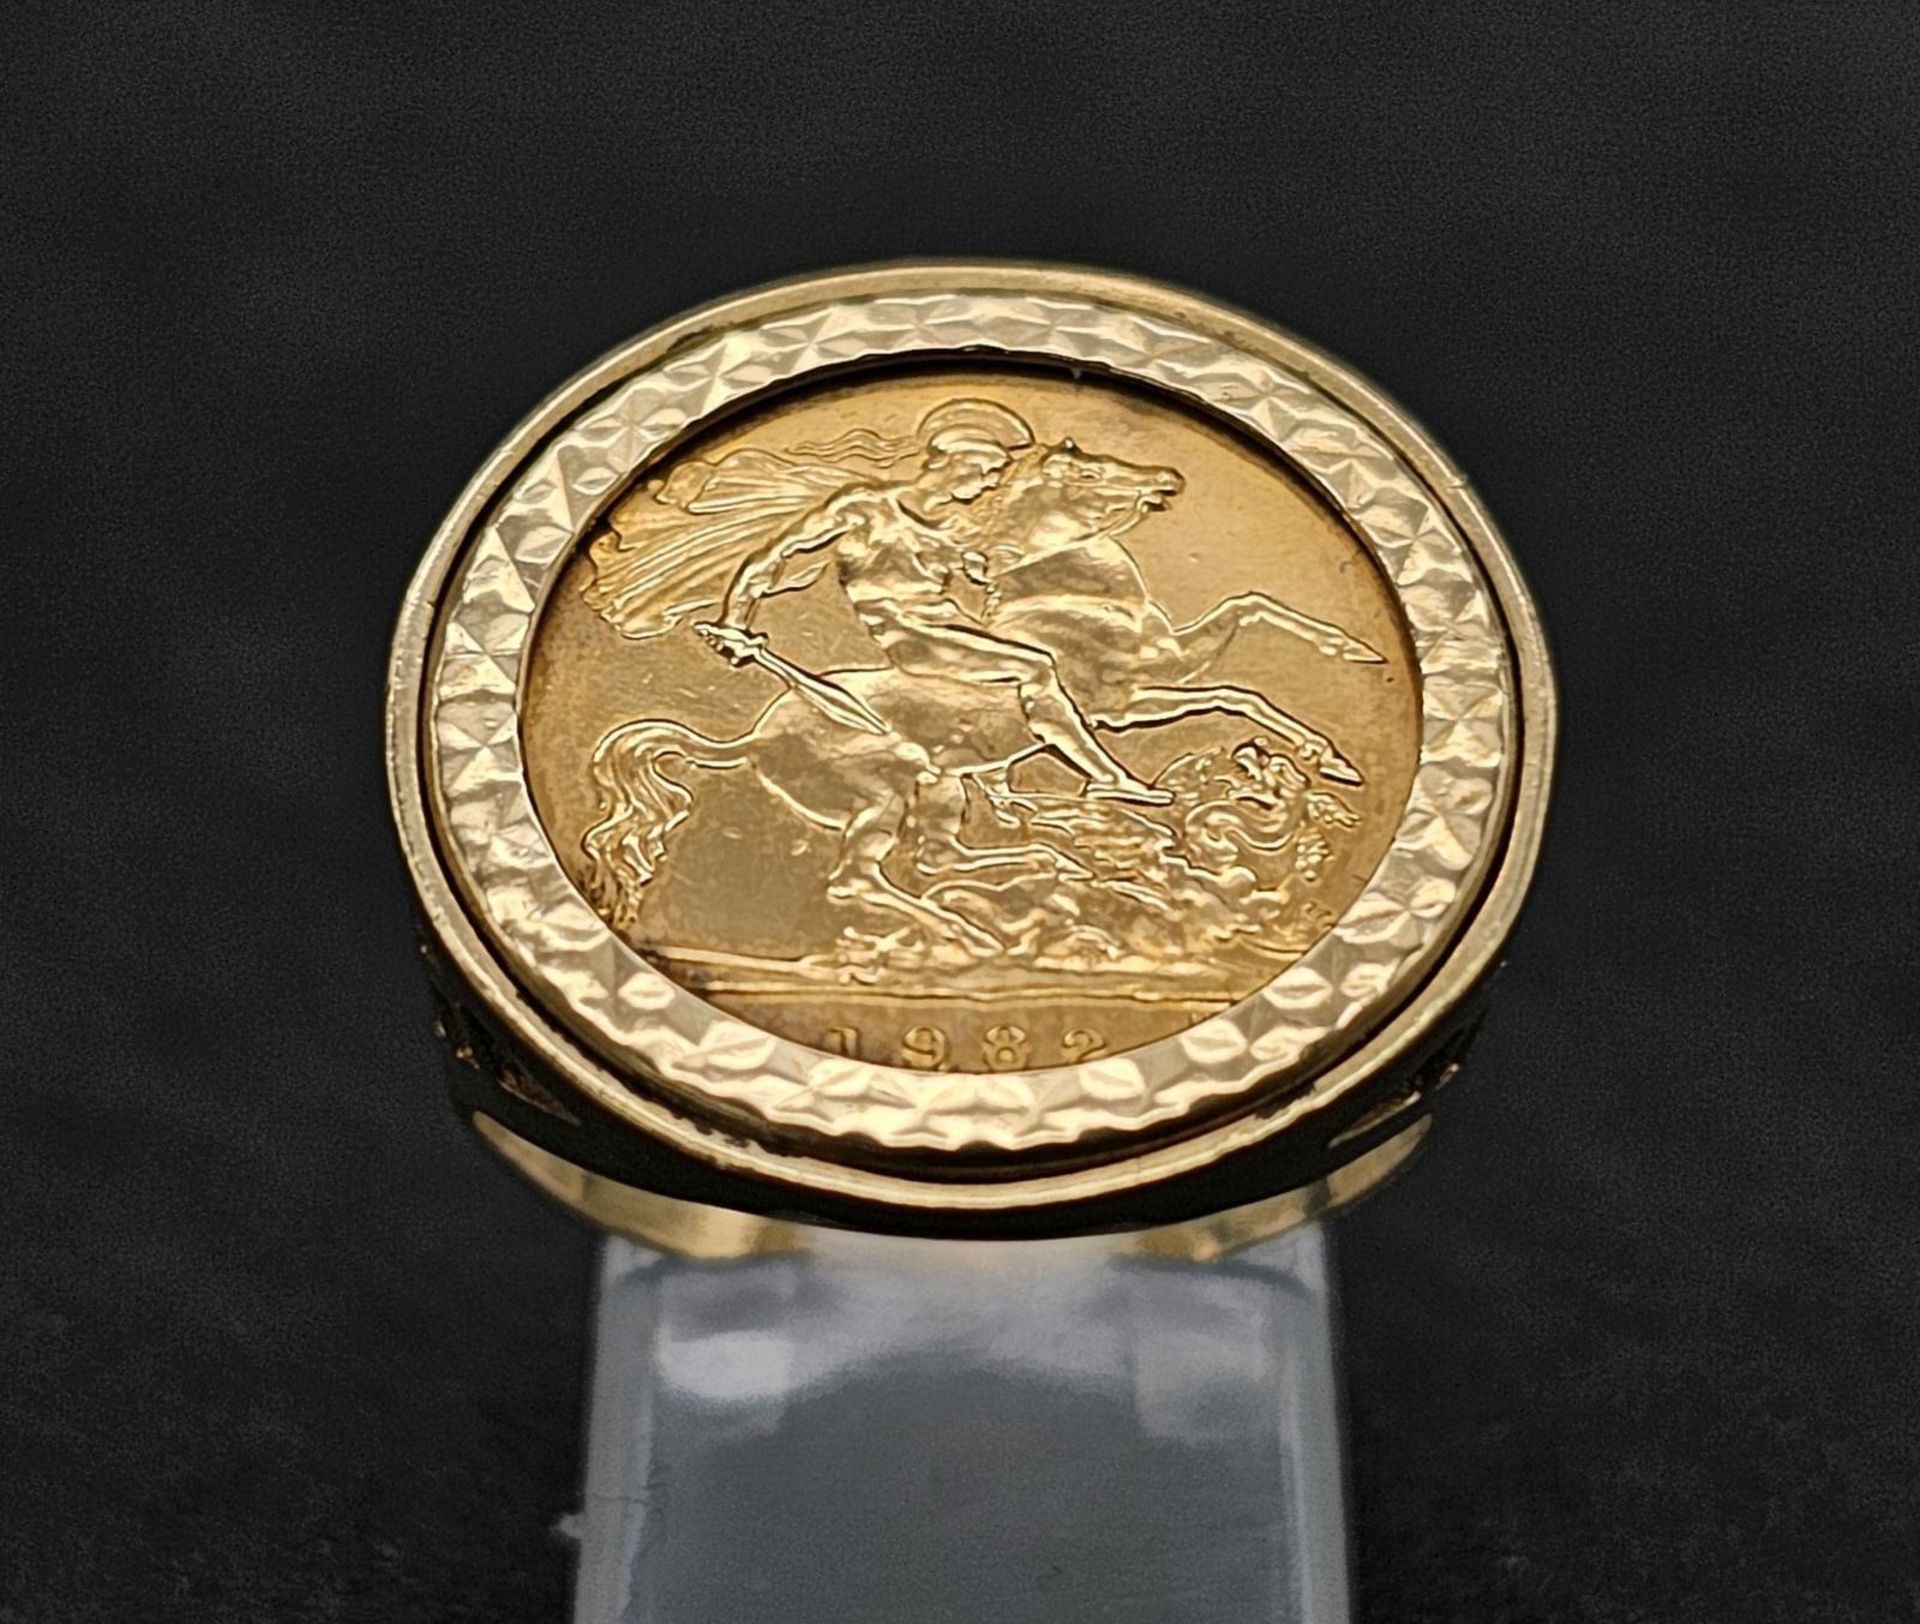 22k yellow gold half sovereign coin, dated 1982 with Queen Elizabeth, set into a 9k yellow gold ring - Bild 3 aus 8